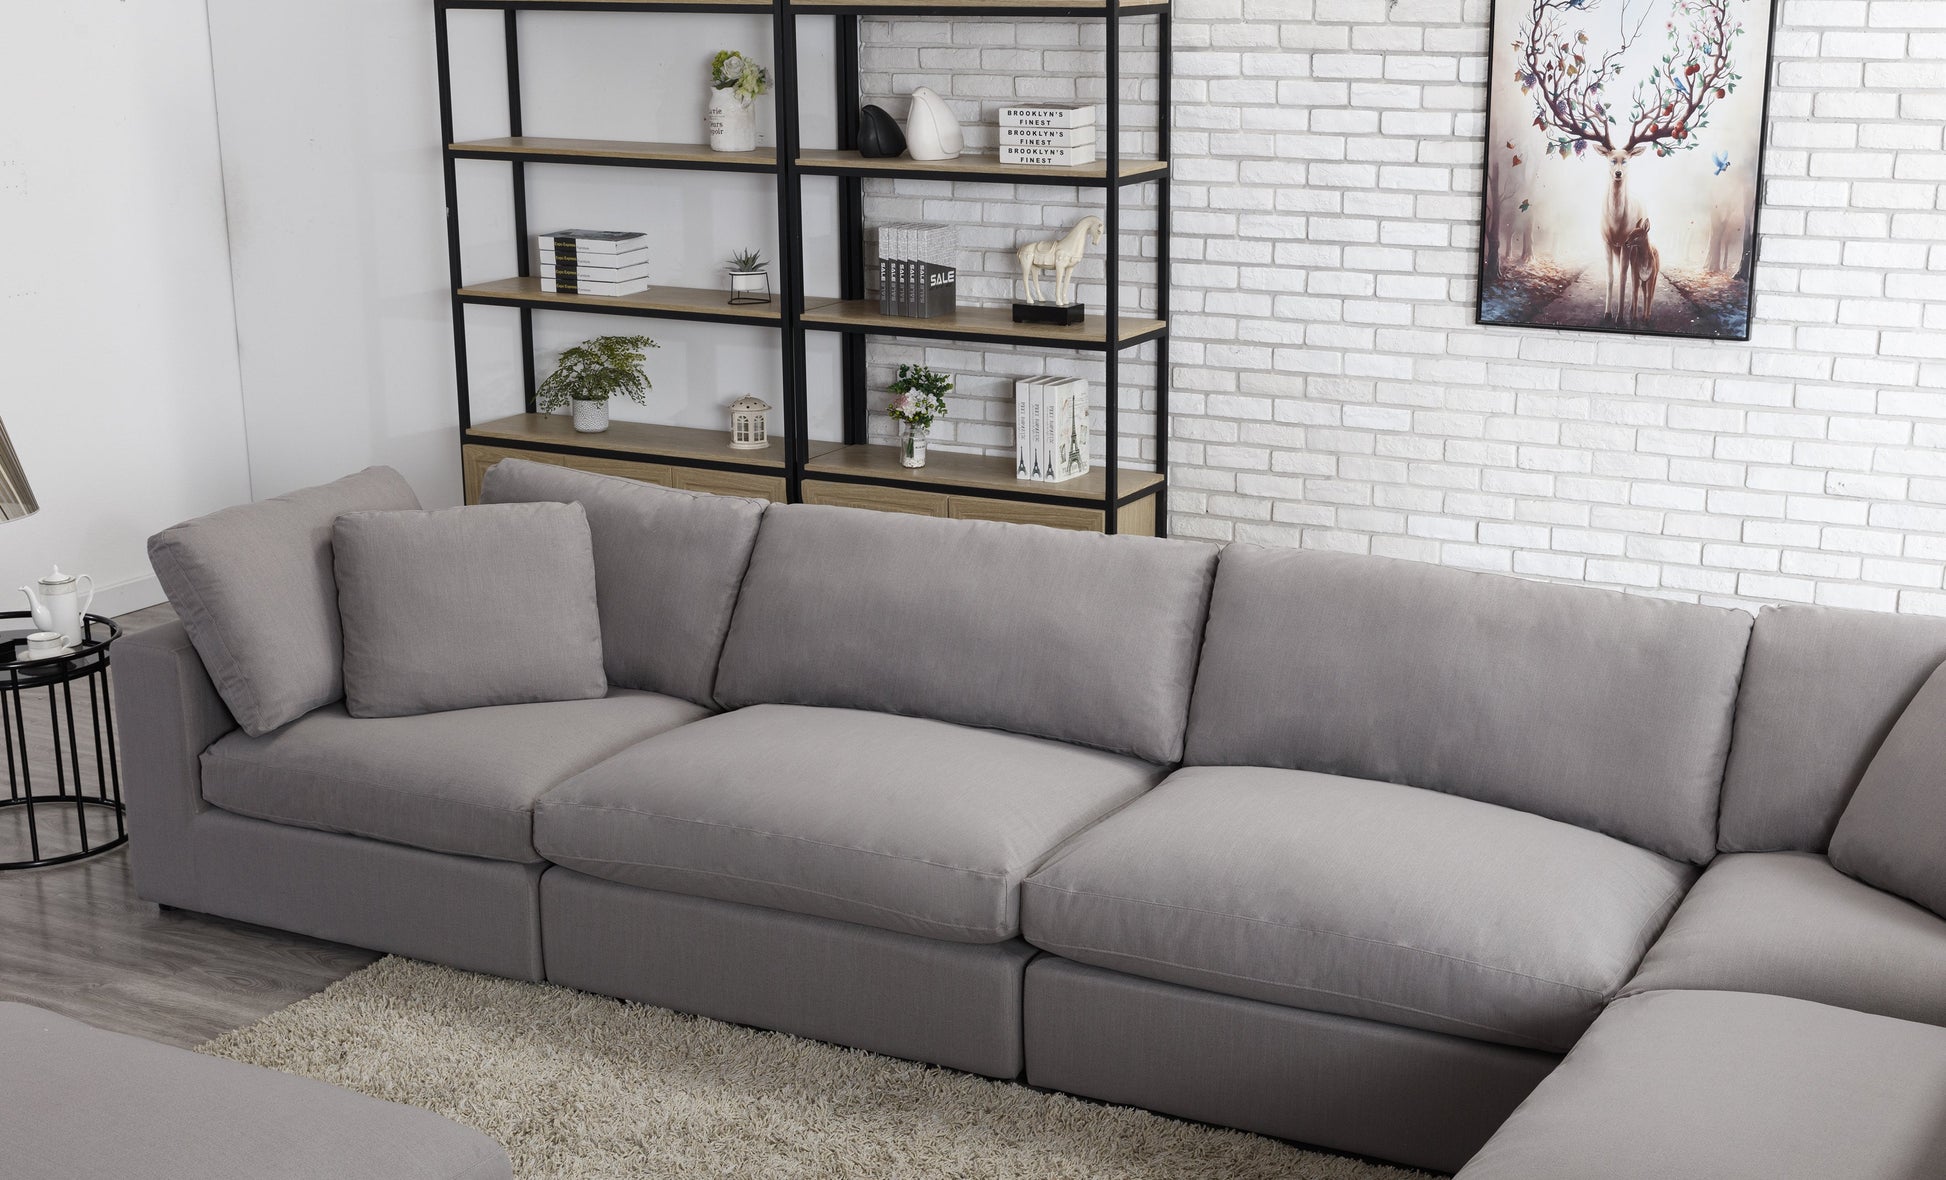 Rivas Contemporary Feather Fill 6 Piece Modular Sectional Sofa With Ot Roundhill Furniture